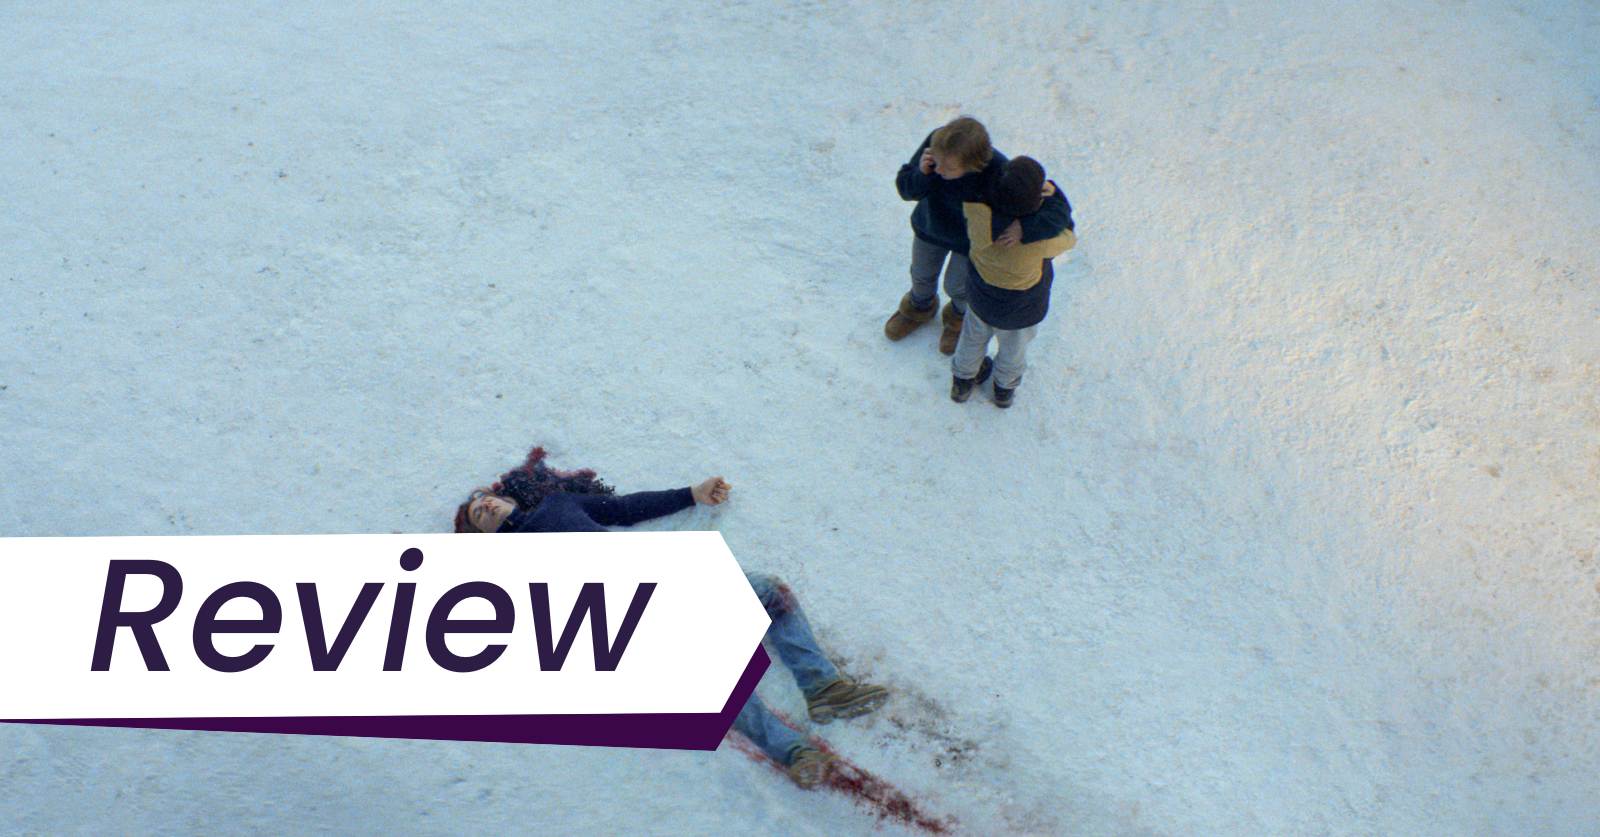 Sandra (Sandra Hüller, right, on the phone) hugs her son, turned away, while looking at her dead husband on the snowy ground, bleeding from the head in Justine Triet's film Anatomy of a Fall.